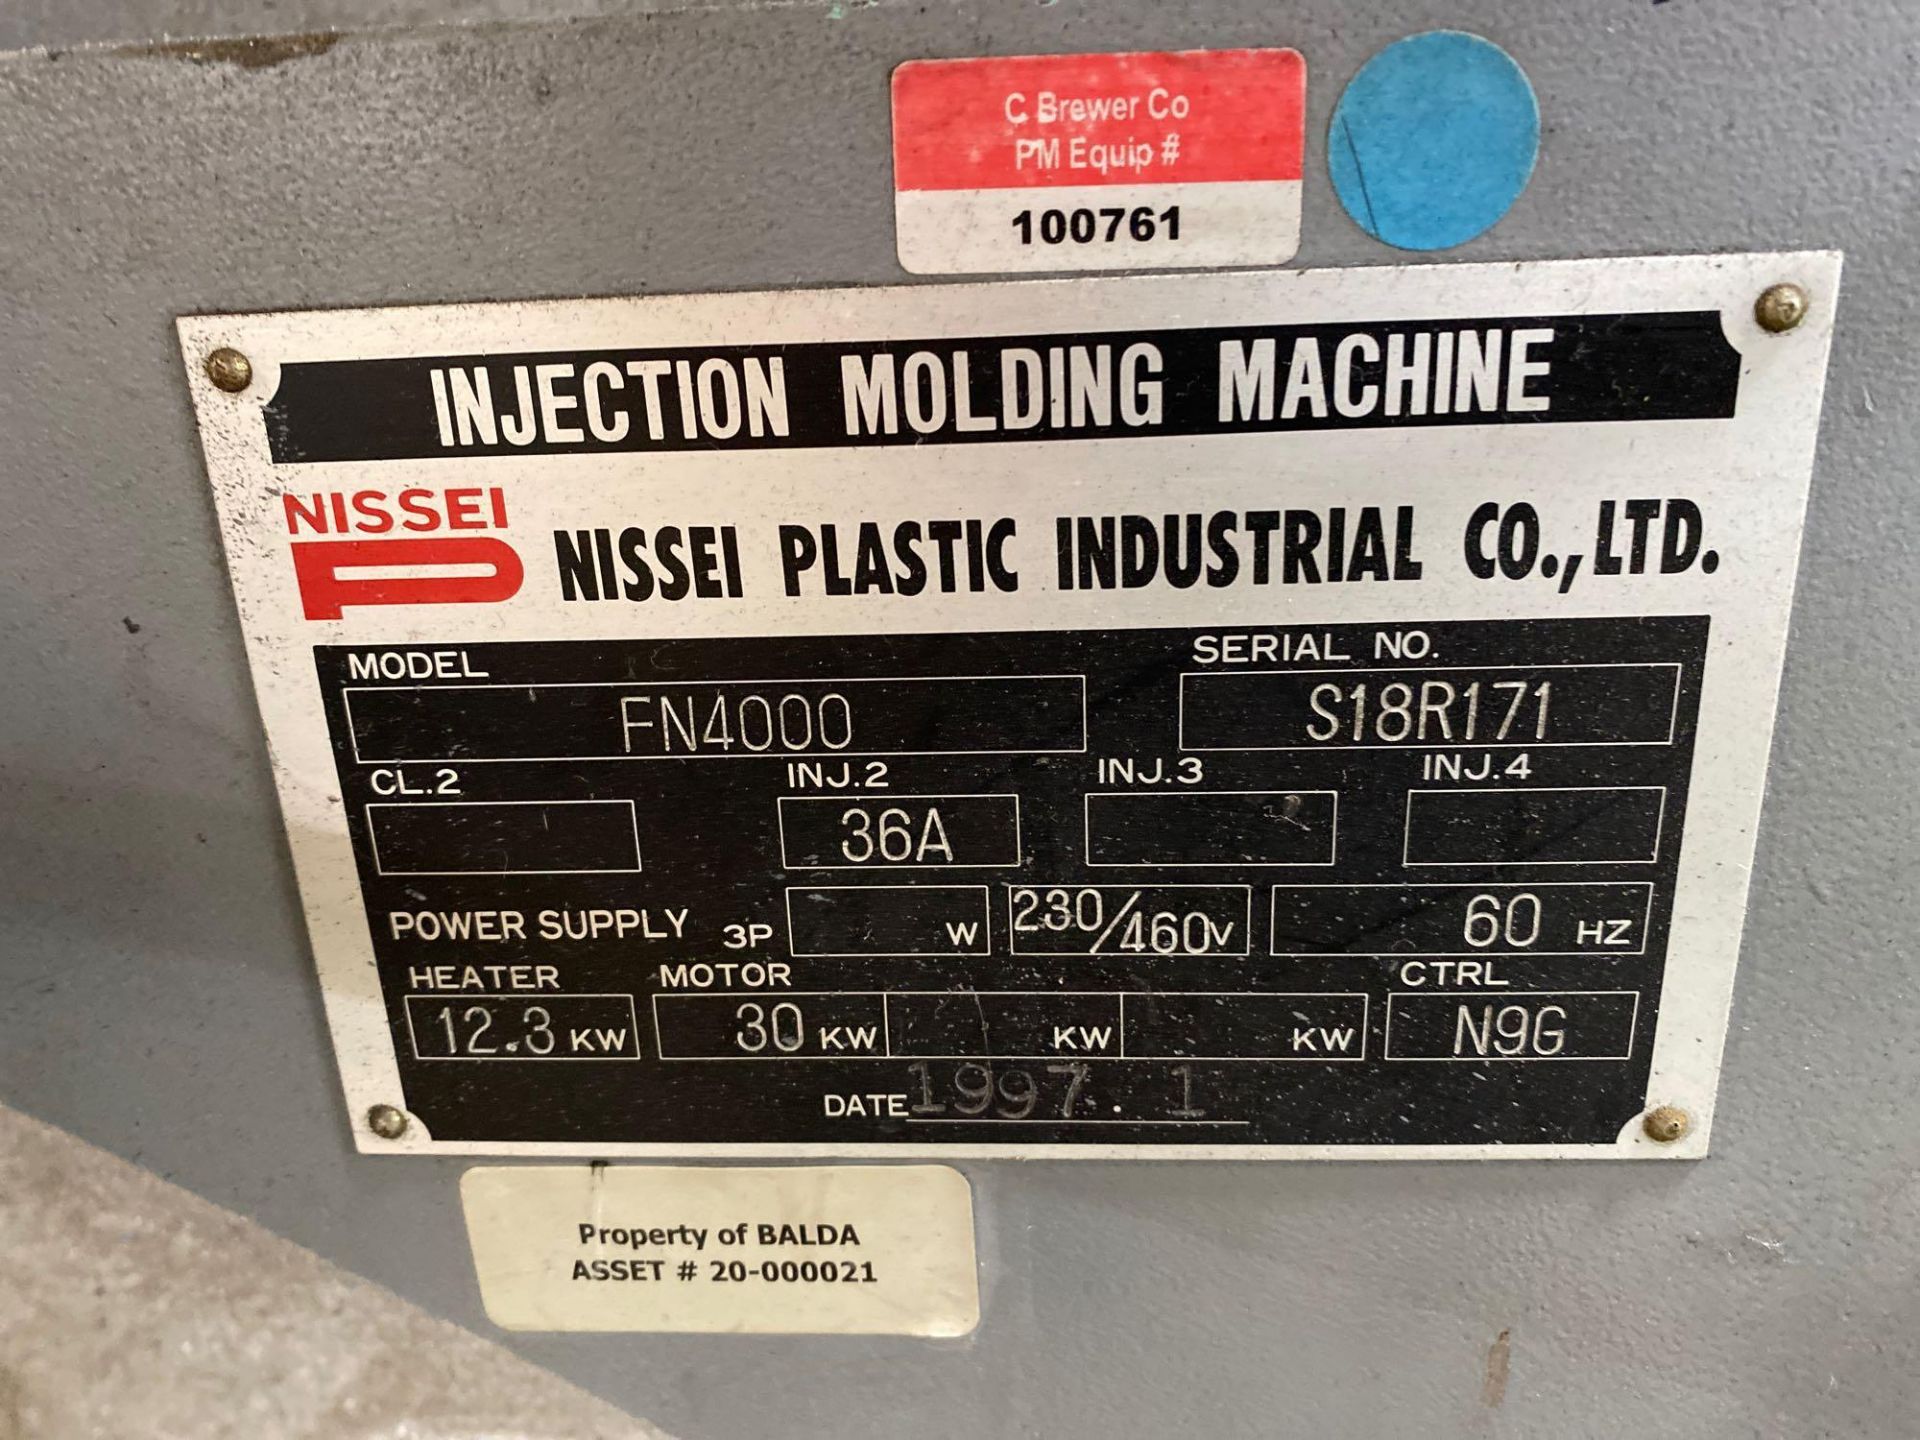 200 TON 14.8 OZ NISSEI MODEL FN4000-36A INJECTION MOLDING MACHINE, S/N S18R171, MFG 1997 - Image 14 of 16